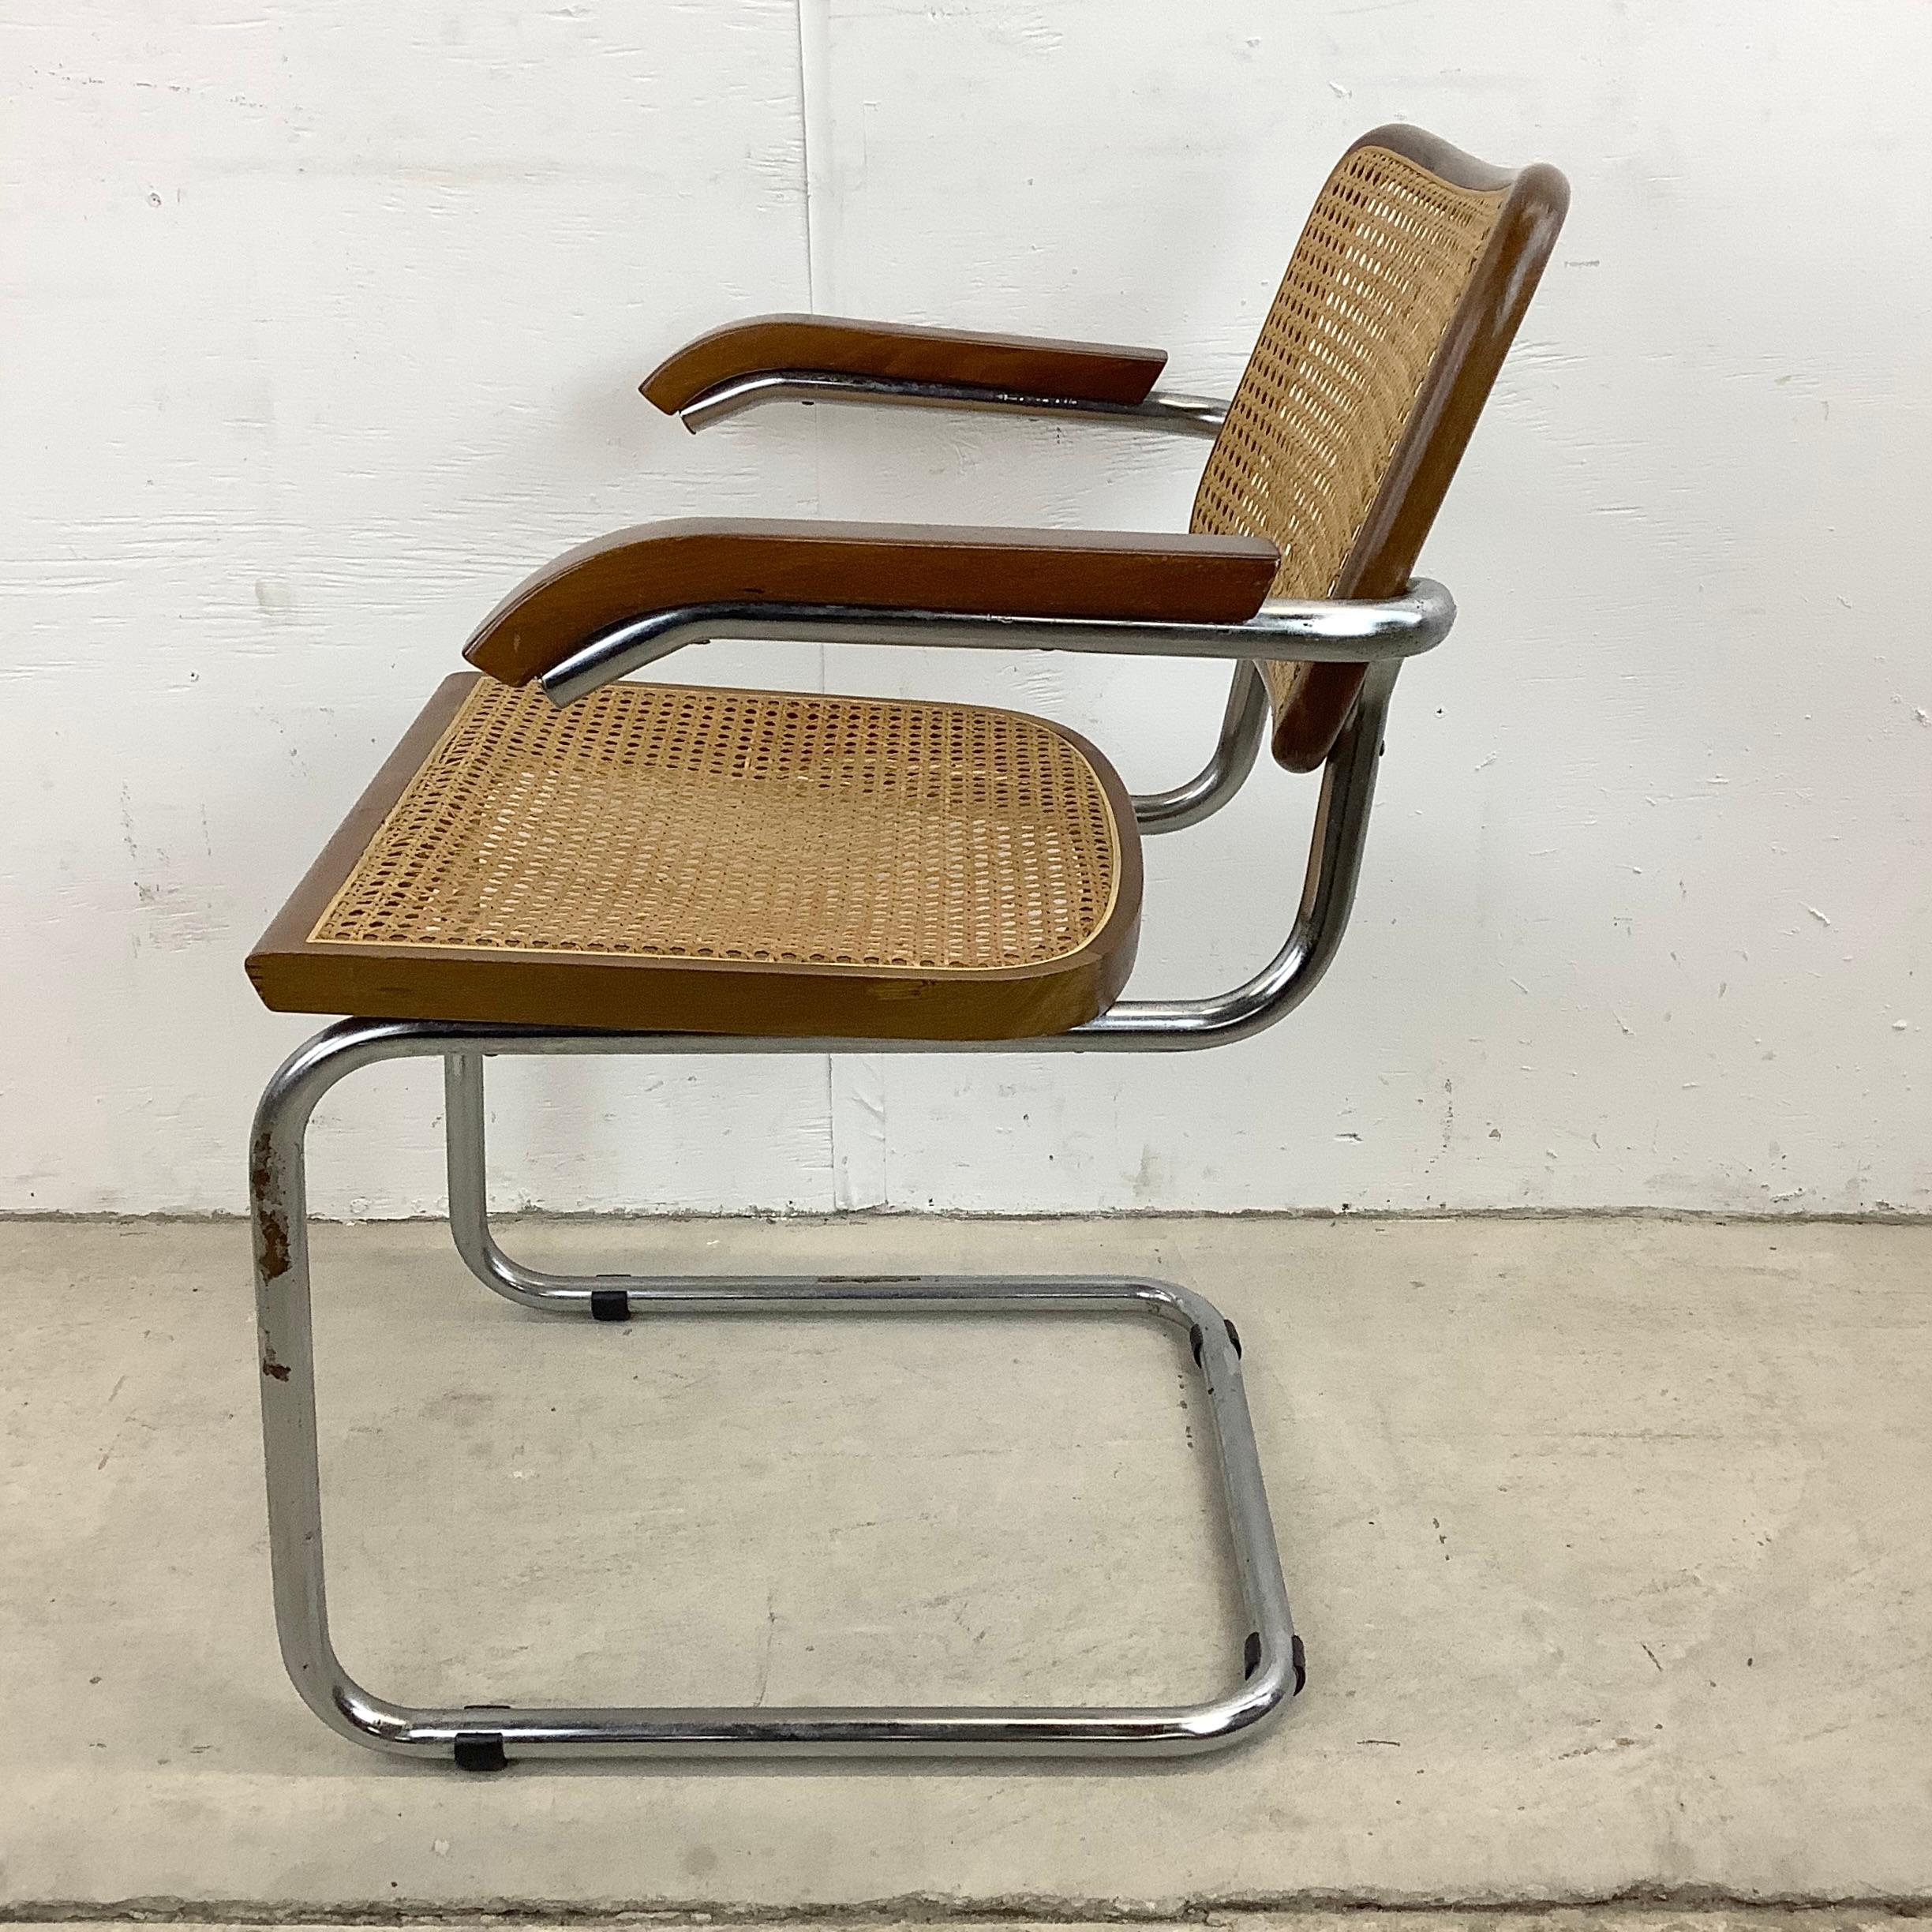 20th Century Midcentury Cesca Style Cane Seat Dining Chair, Made in Italy